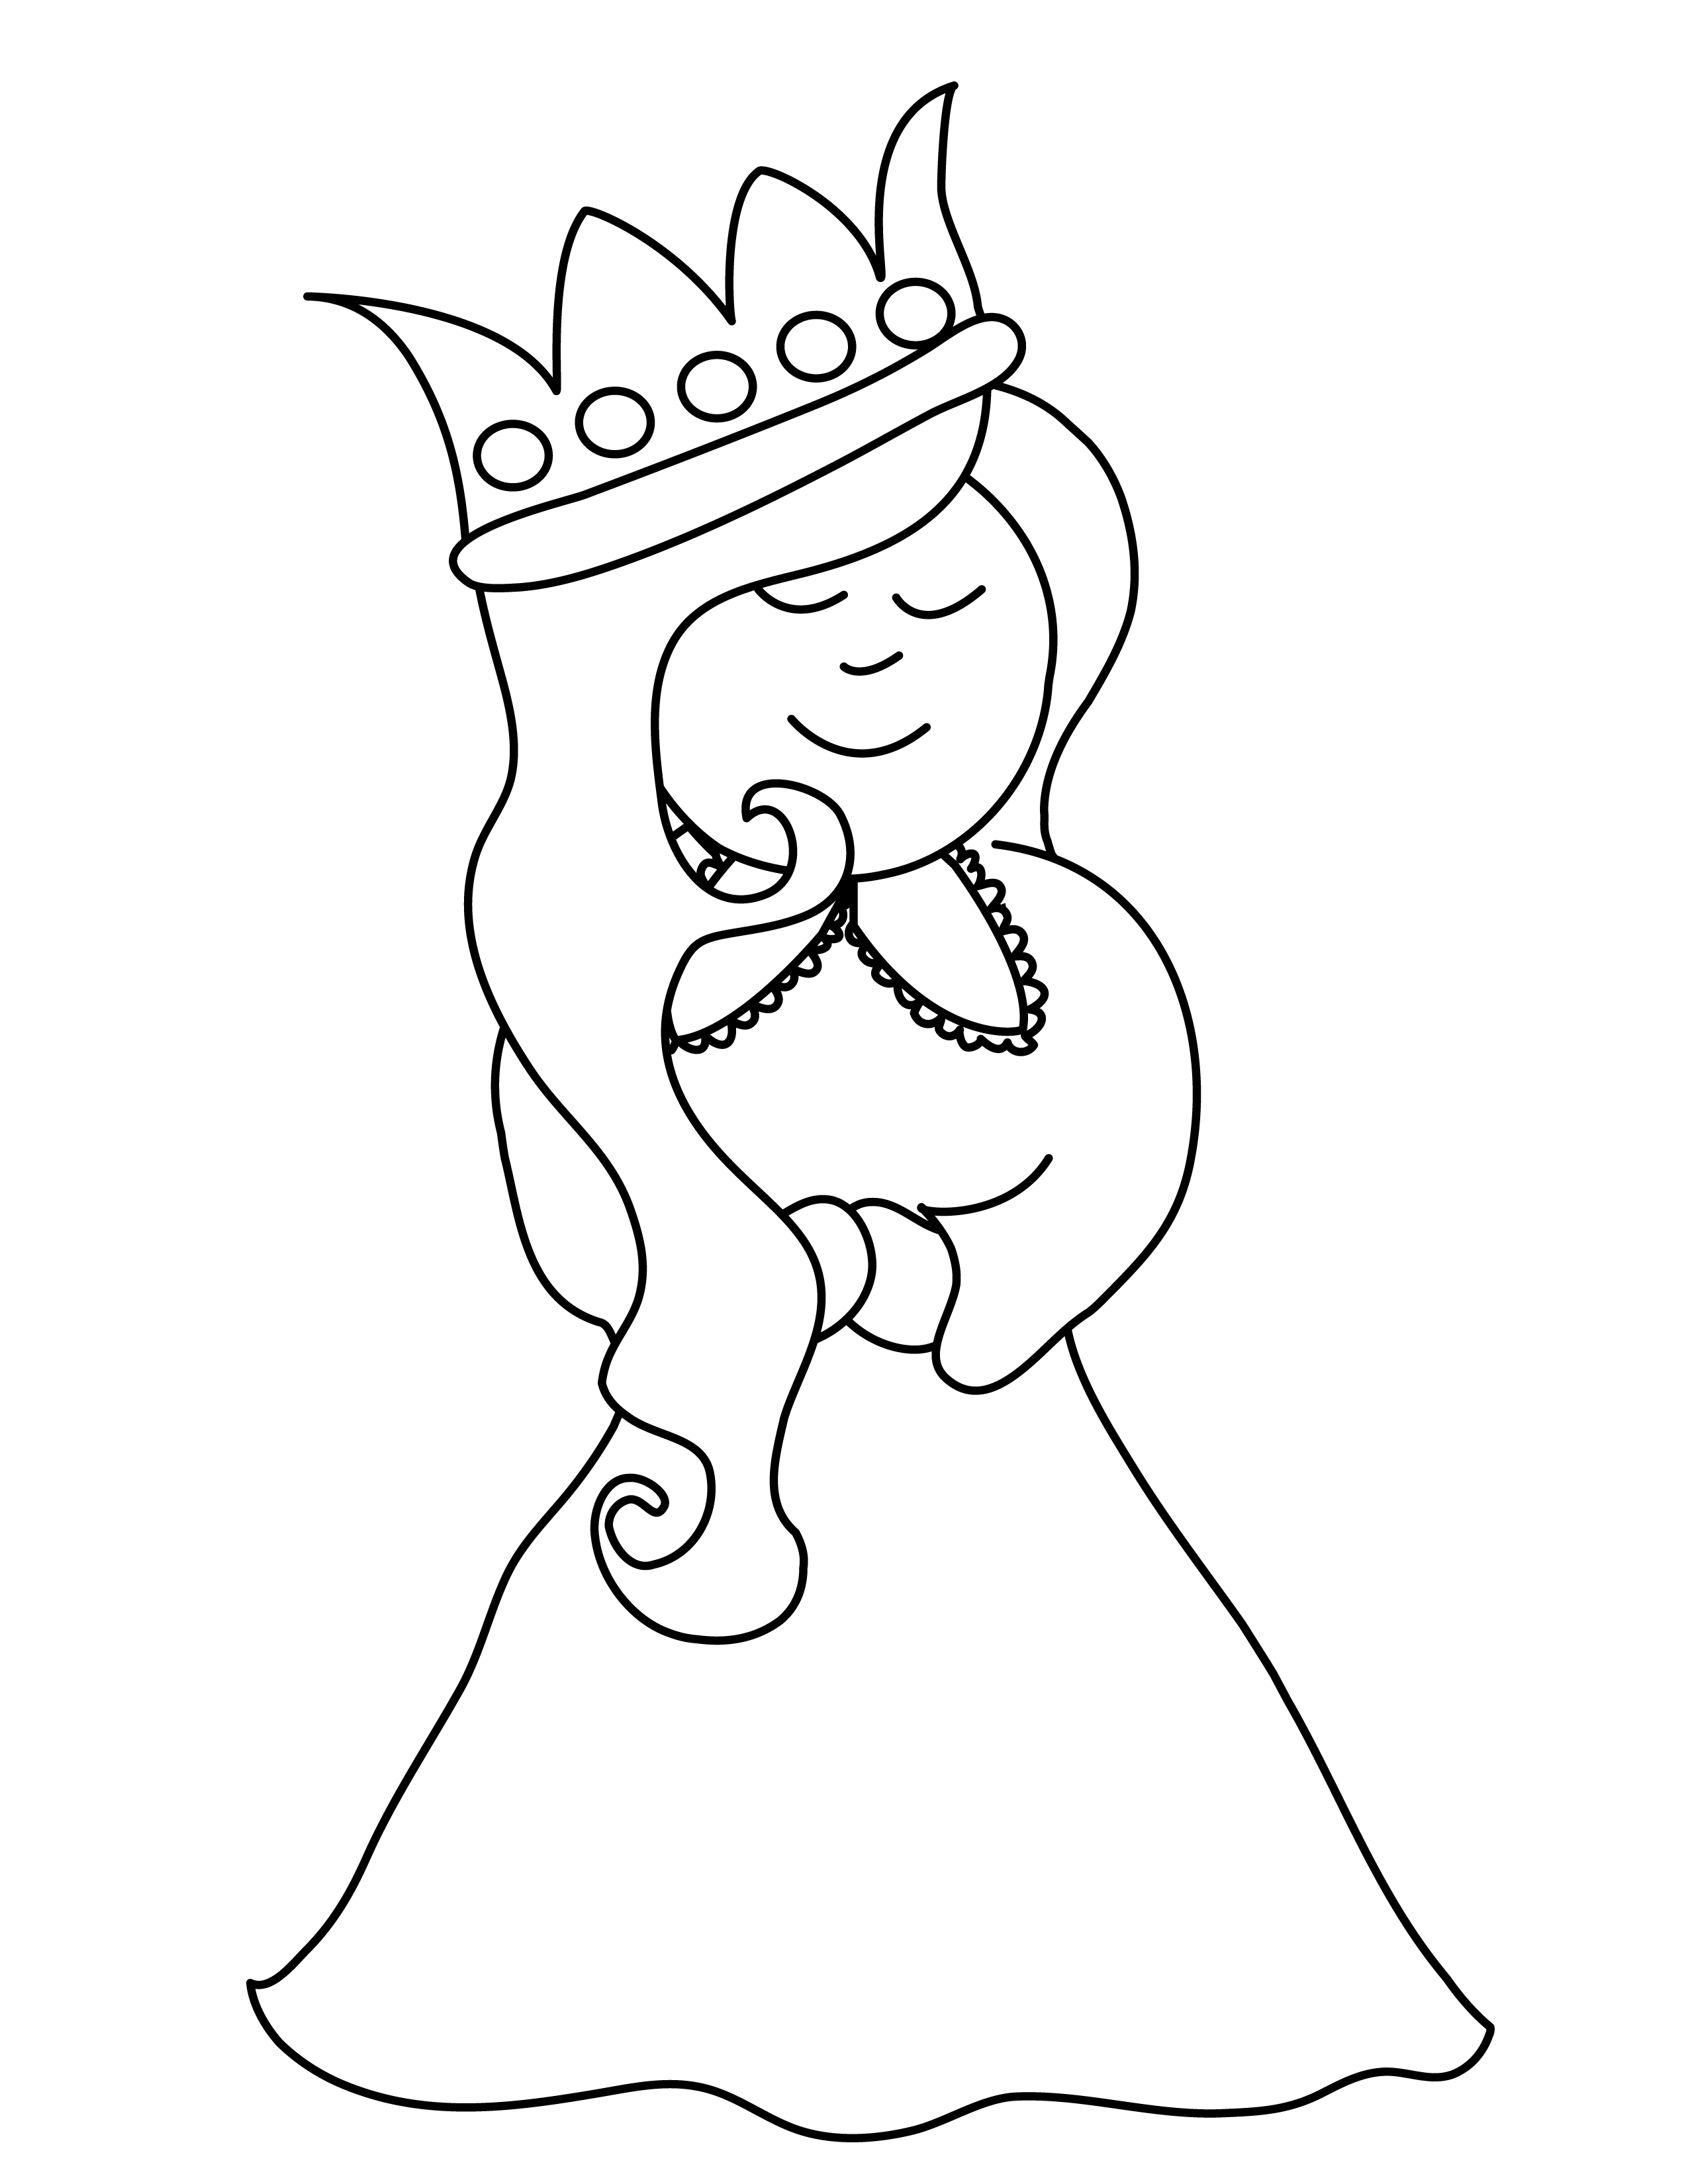 queen esther queen coloring pages | Printable Coloring - ClipArt Best